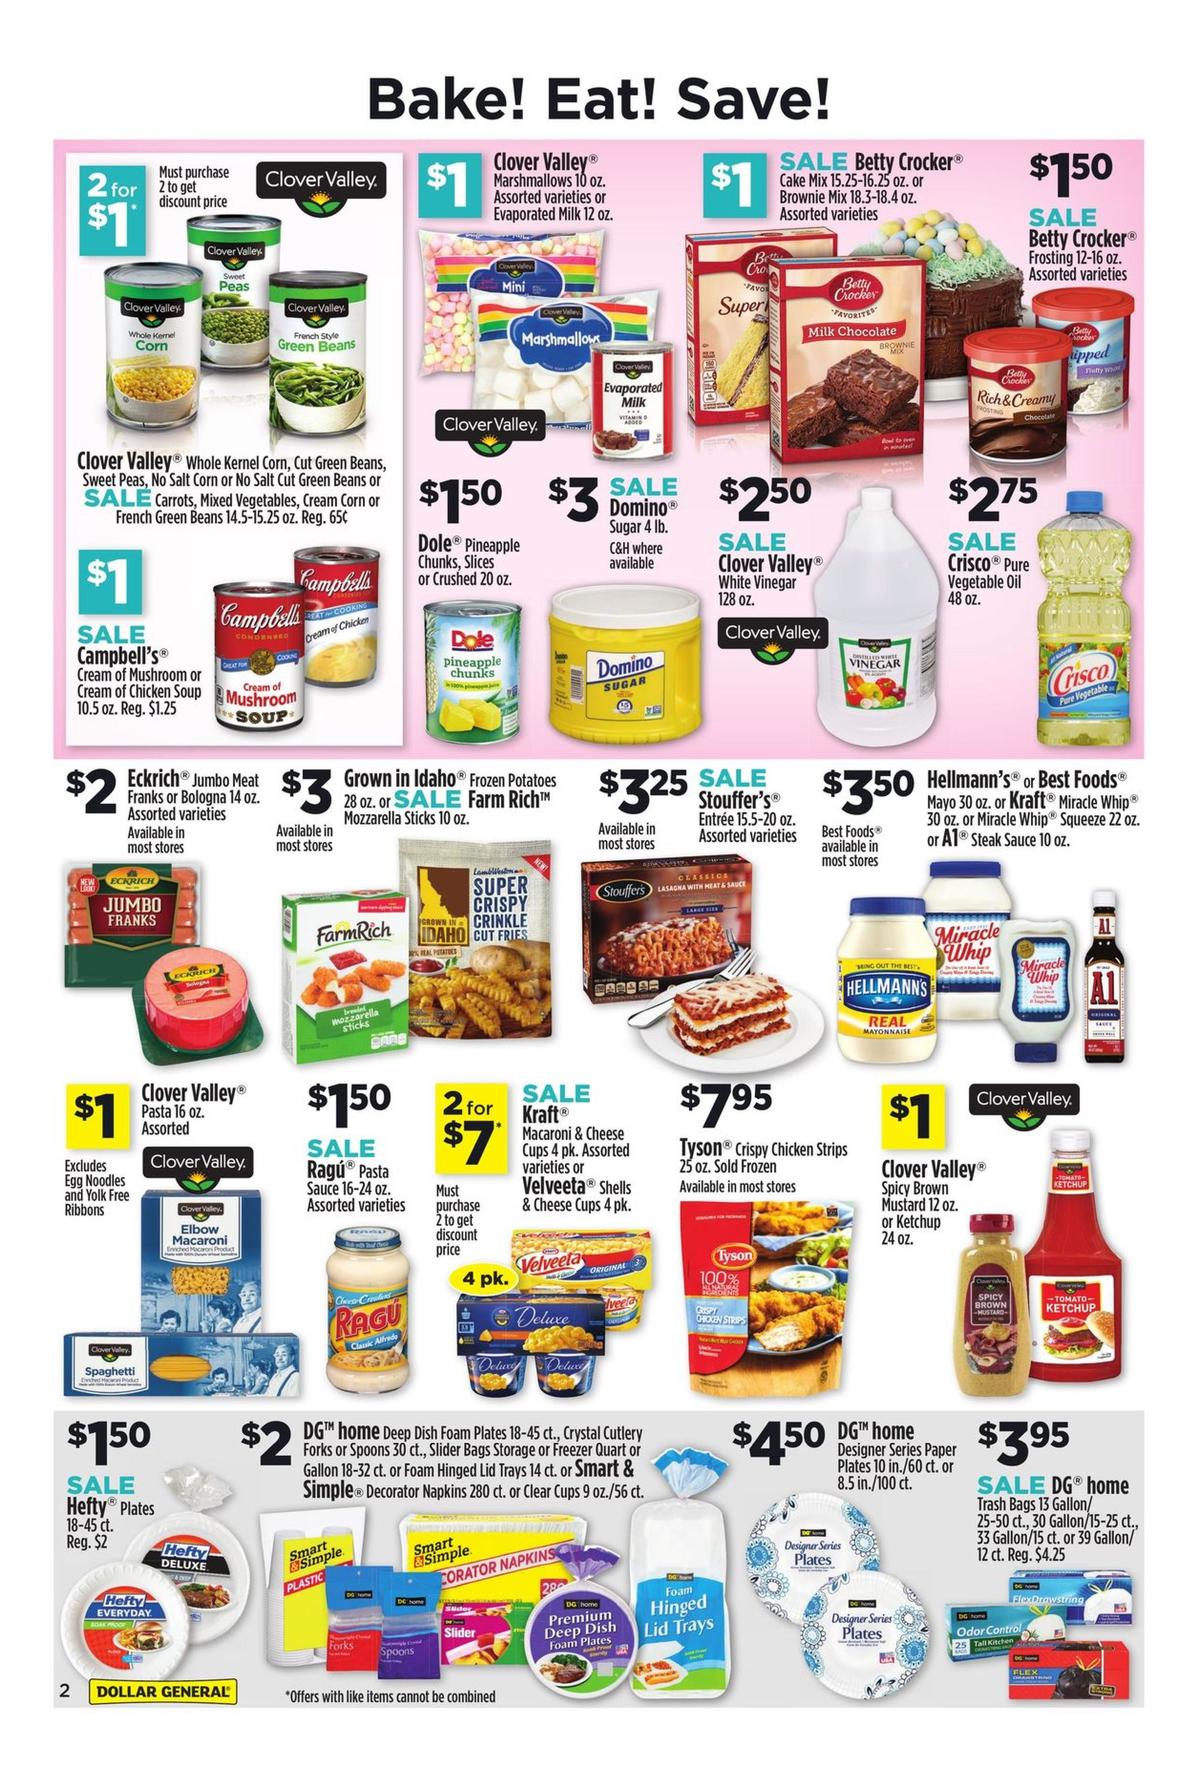 Dollar General Weekly Ad from March 24